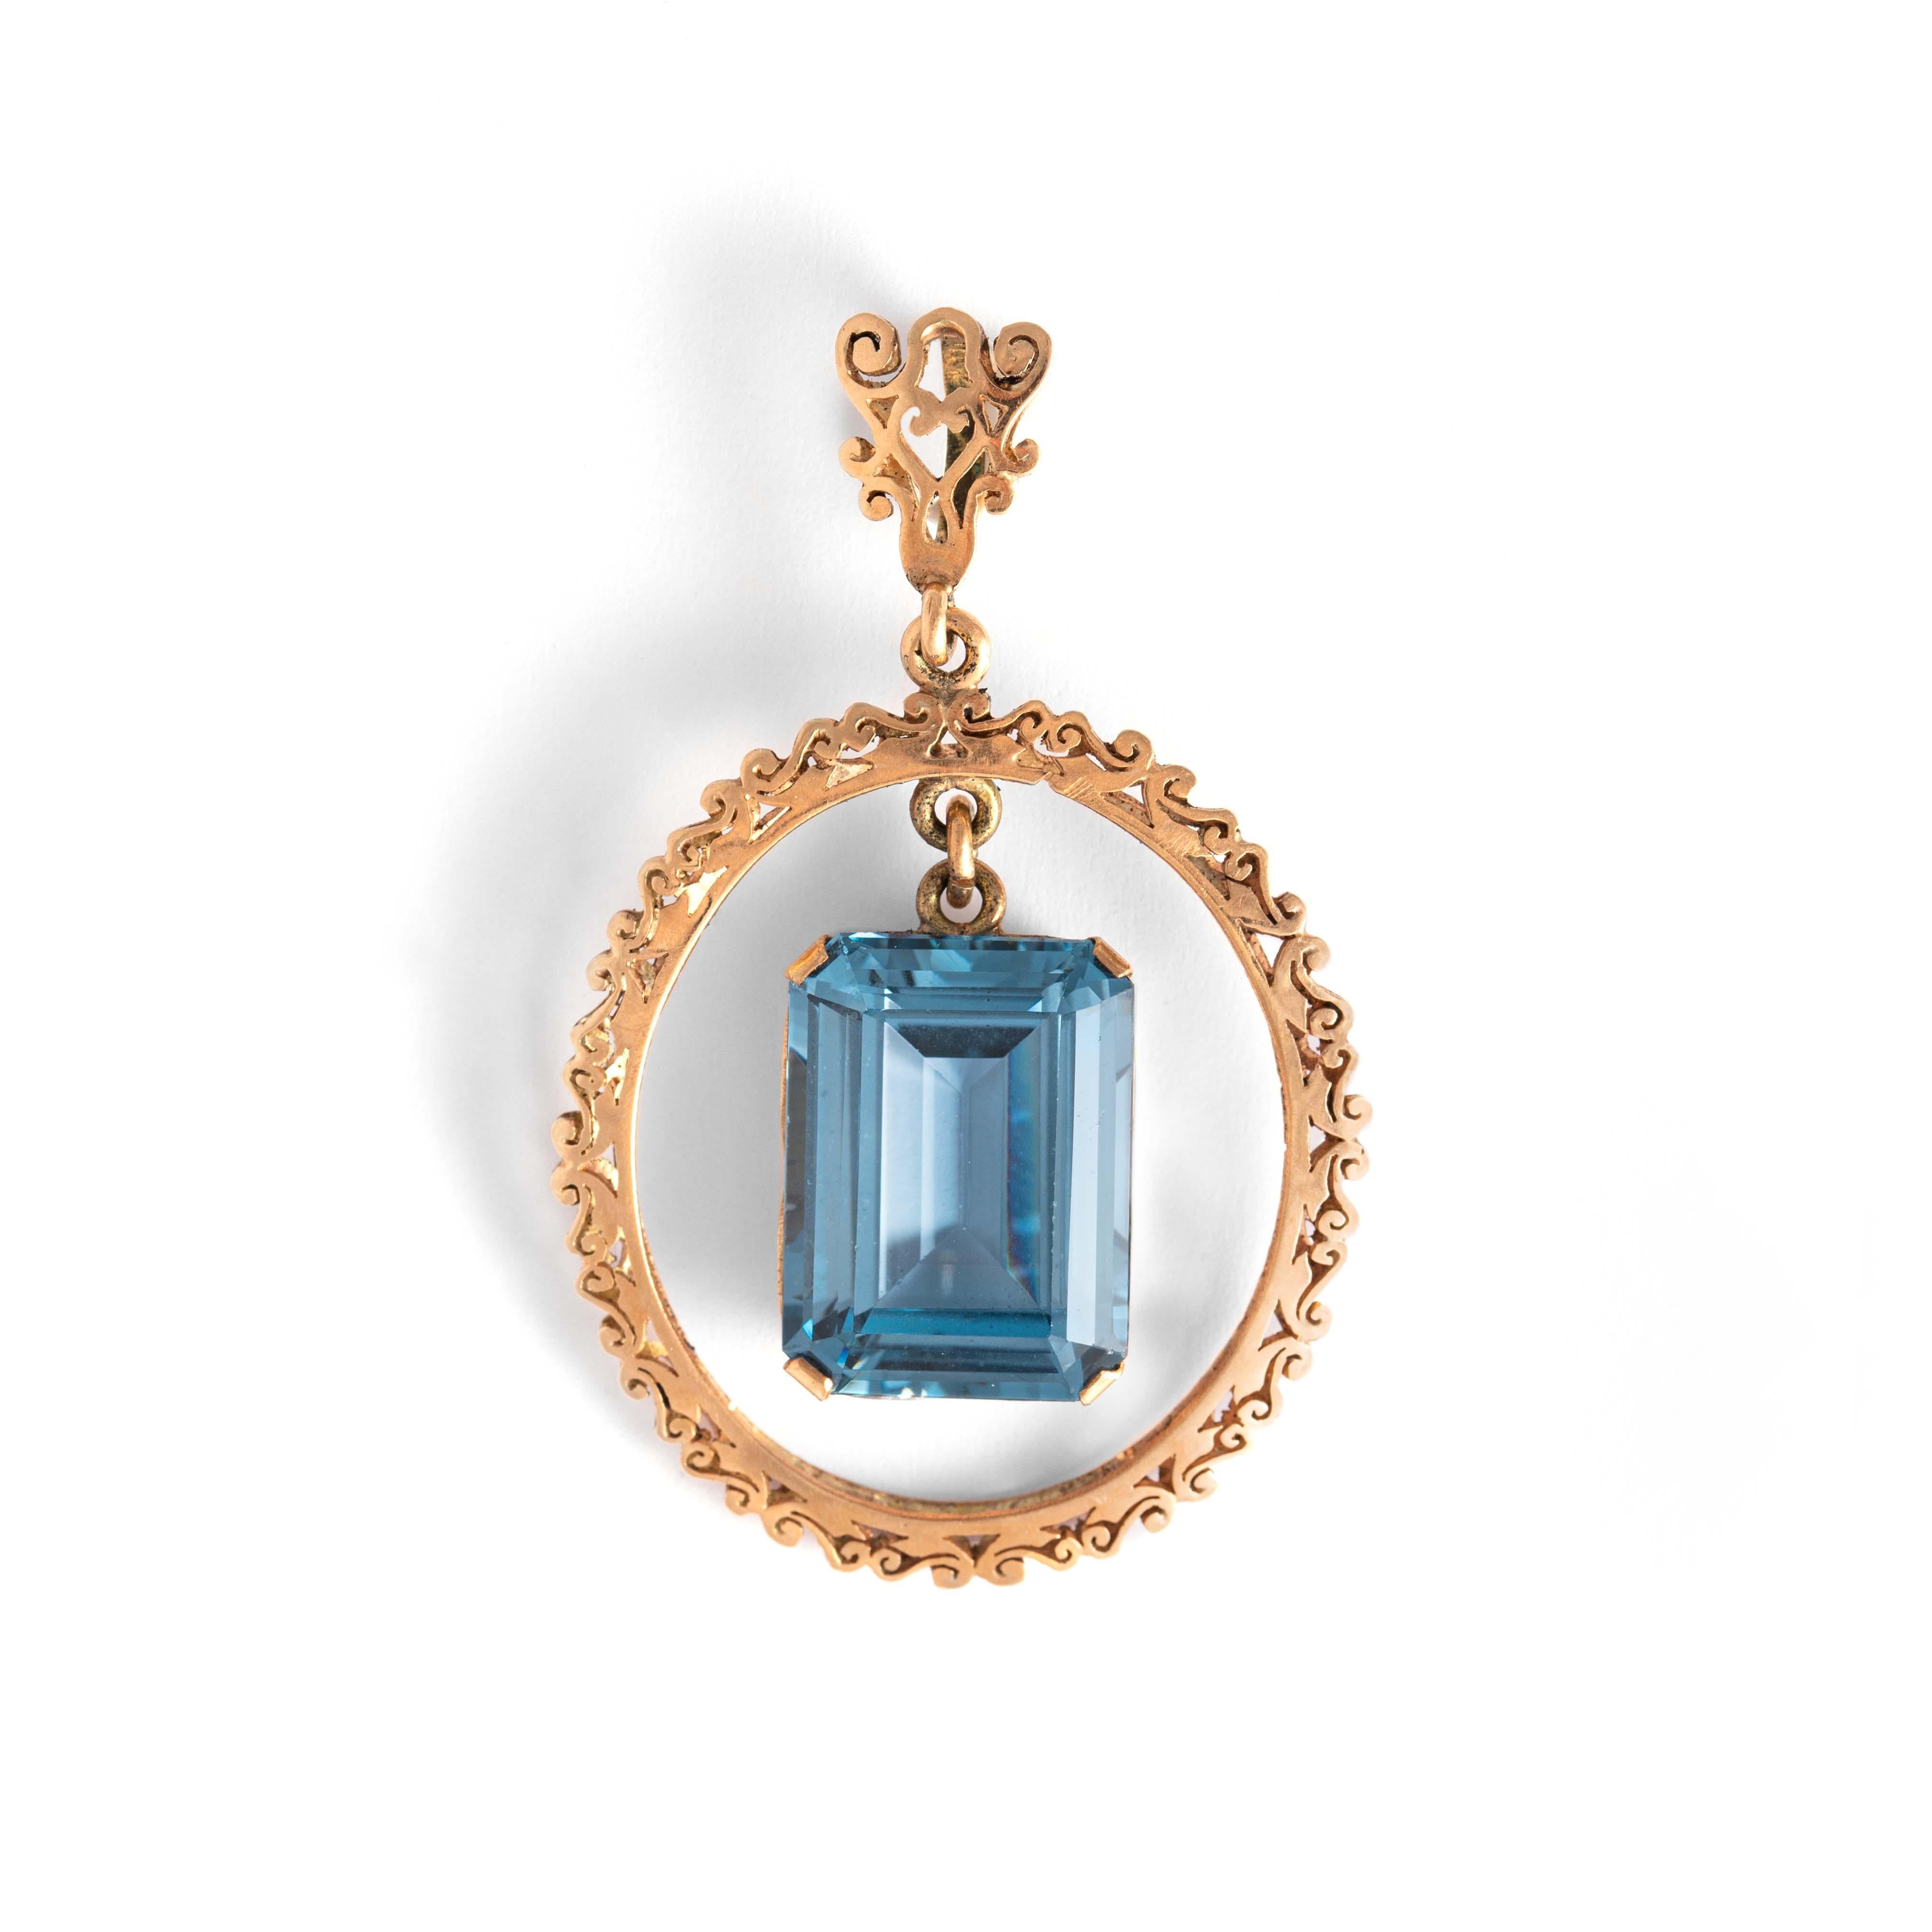 14K gold pendant holding a large emerald-cut blue stone.
Dimensions: 5.70 centimeters x 3.50 centimeters. 
Gross weight: 13.03 grams.